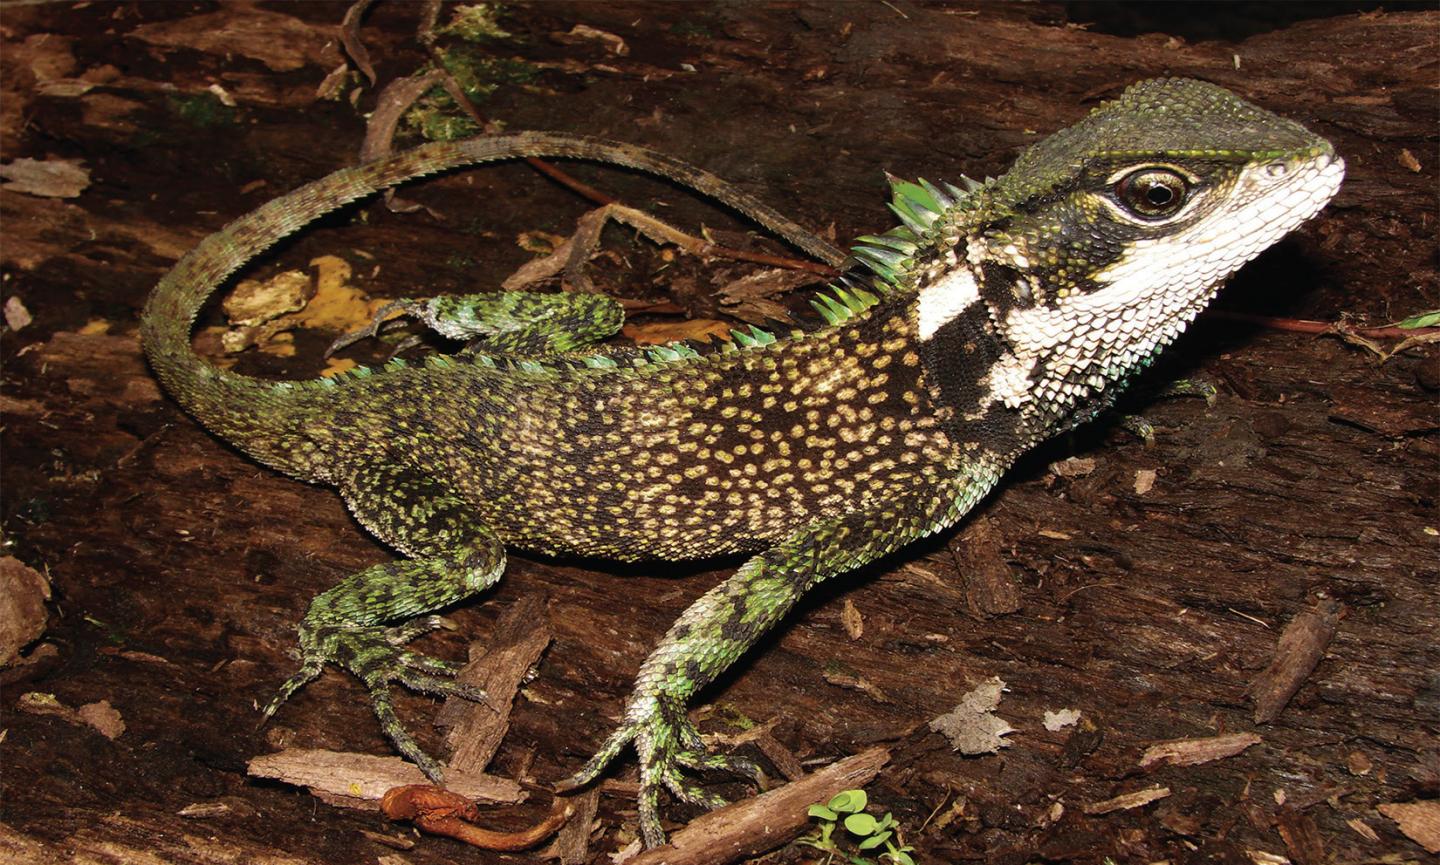 Dwarf dragons discovered in the Andes of Peru | EurekAlert!